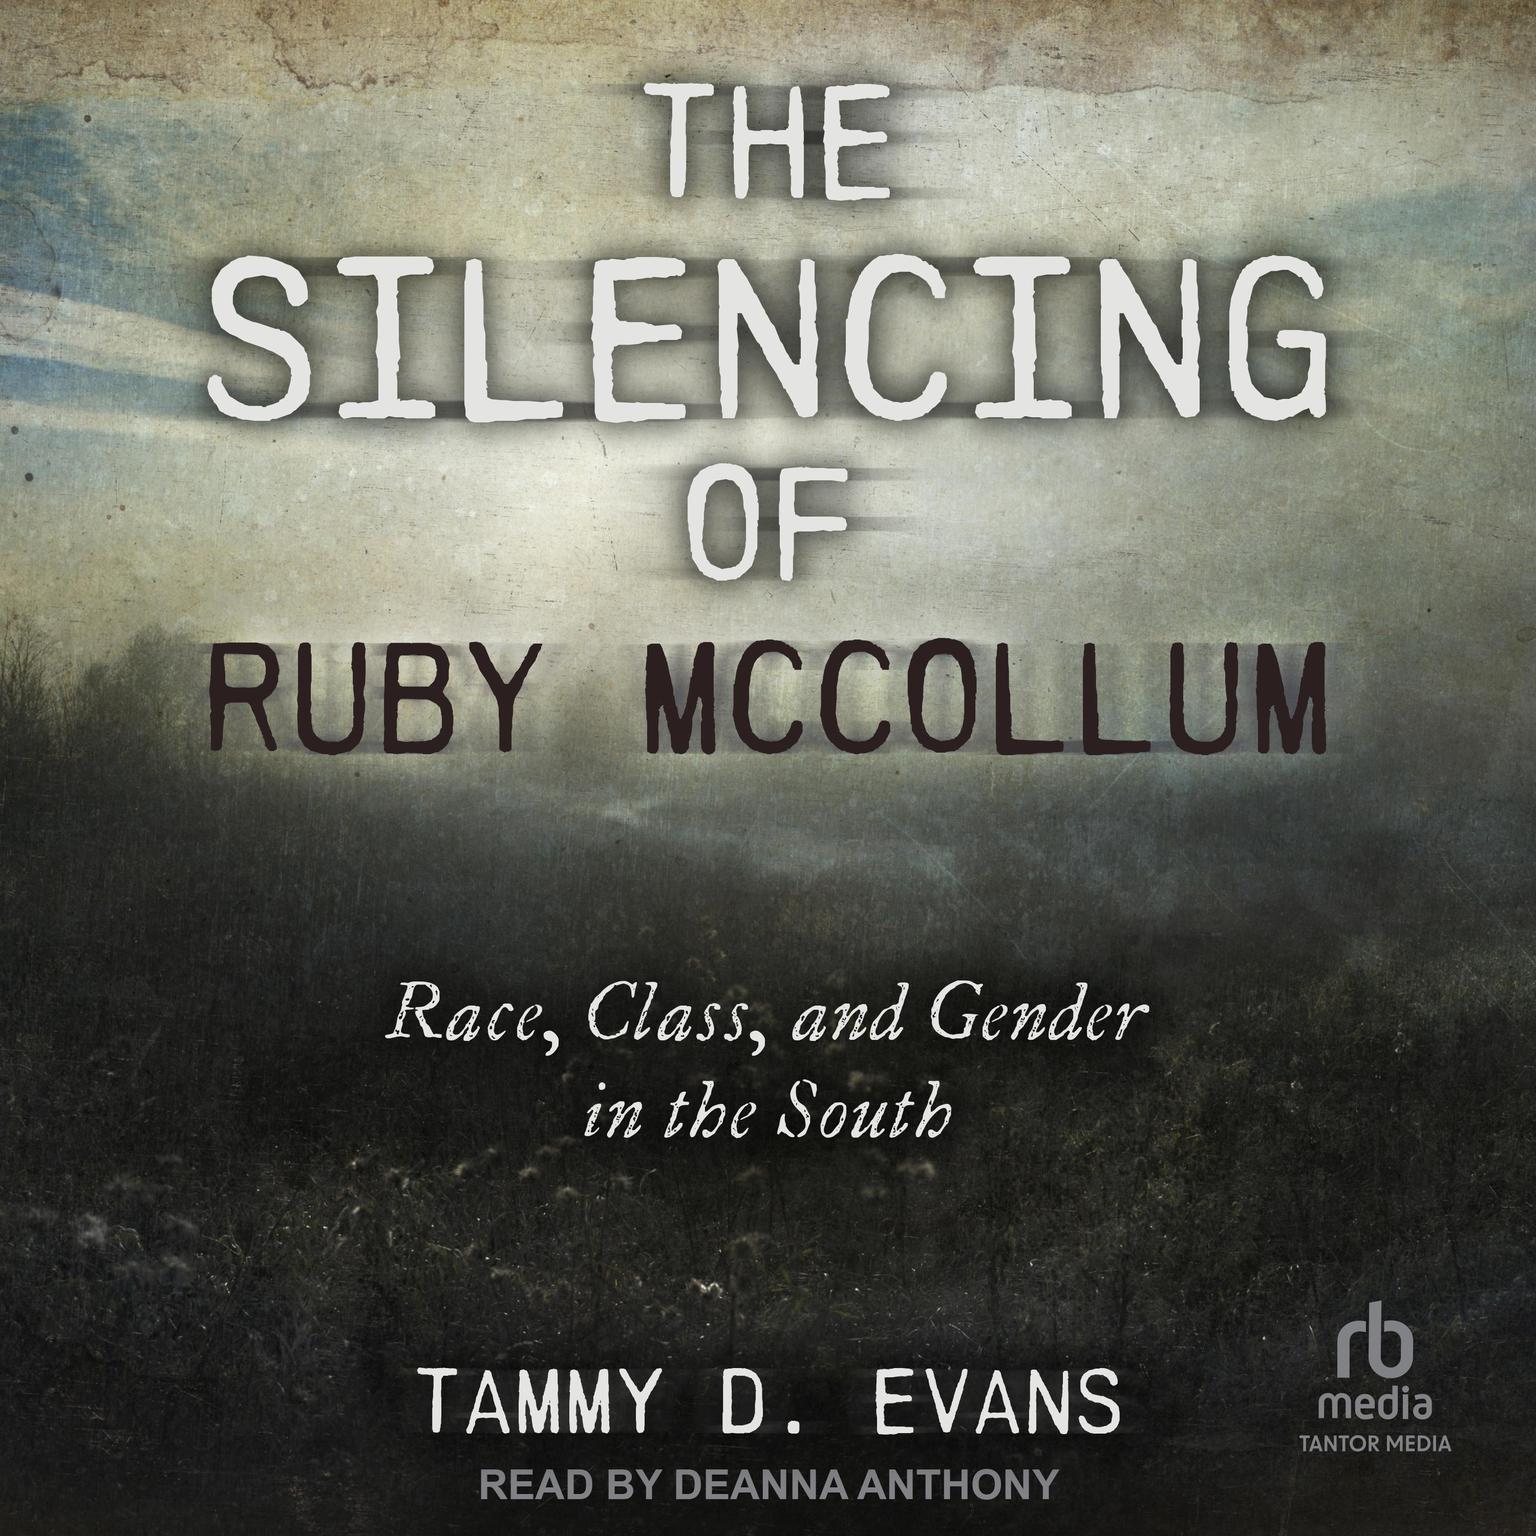 The Silencing of Ruby McCollum: Race, Class, and Gender in the South Audiobook, by Tammy D. Evans